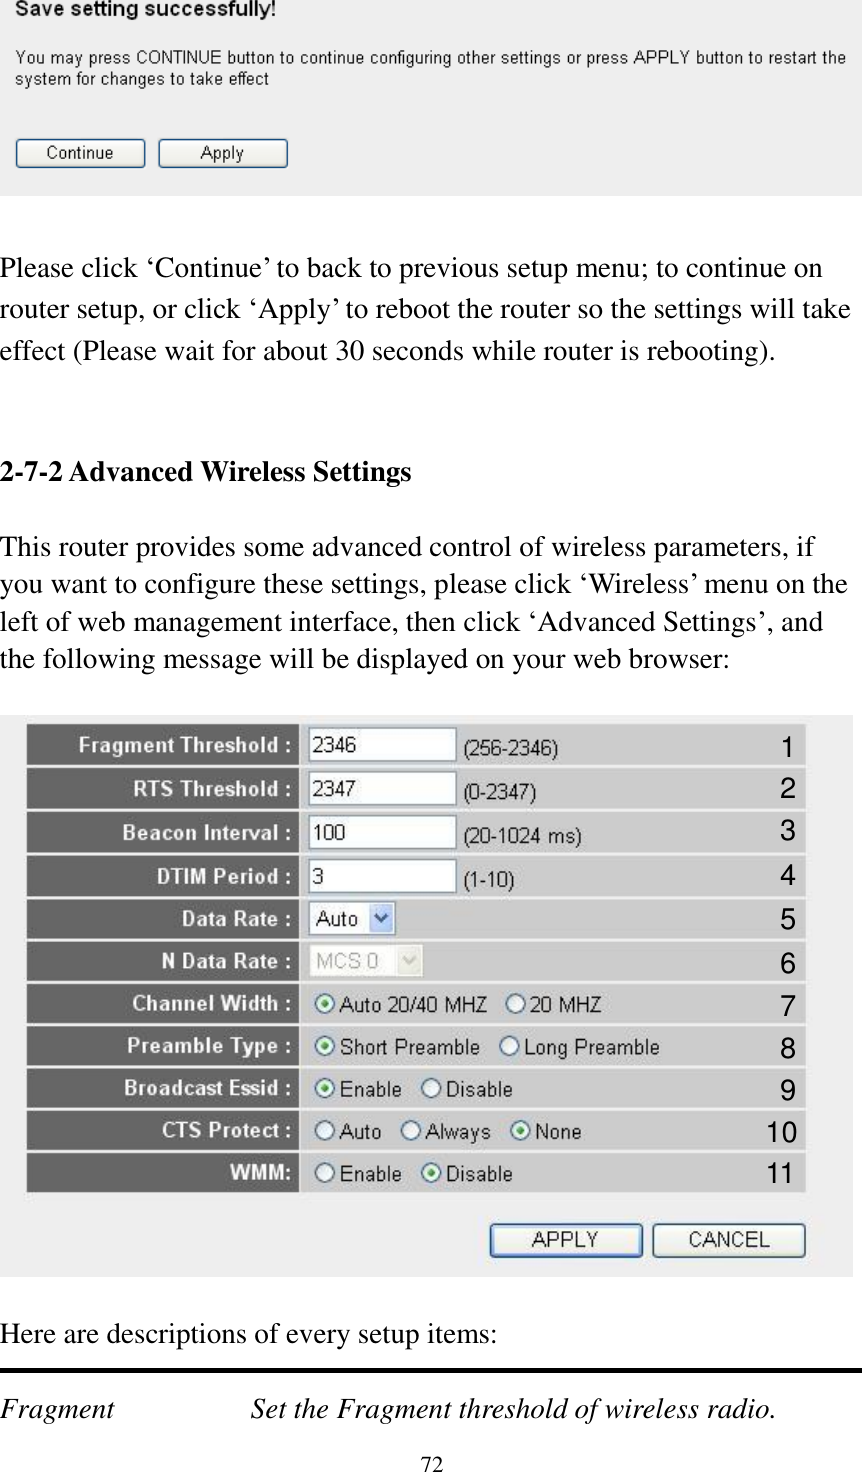 72   Please click ‘Continue’ to back to previous setup menu; to continue on router setup, or click ‘Apply’ to reboot the router so the settings will take effect (Please wait for about 30 seconds while router is rebooting).   2-7-2 Advanced Wireless Settings  This router provides some advanced control of wireless parameters, if you want to configure these settings, please click ‘Wireless’ menu on the left of web management interface, then click ‘Advanced Settings’, and the following message will be displayed on your web browser:    Here are descriptions of every setup items:  Fragment  Set the Fragment threshold of wireless radio.    1 2 3 4 5 7 8 6 9 10 11 